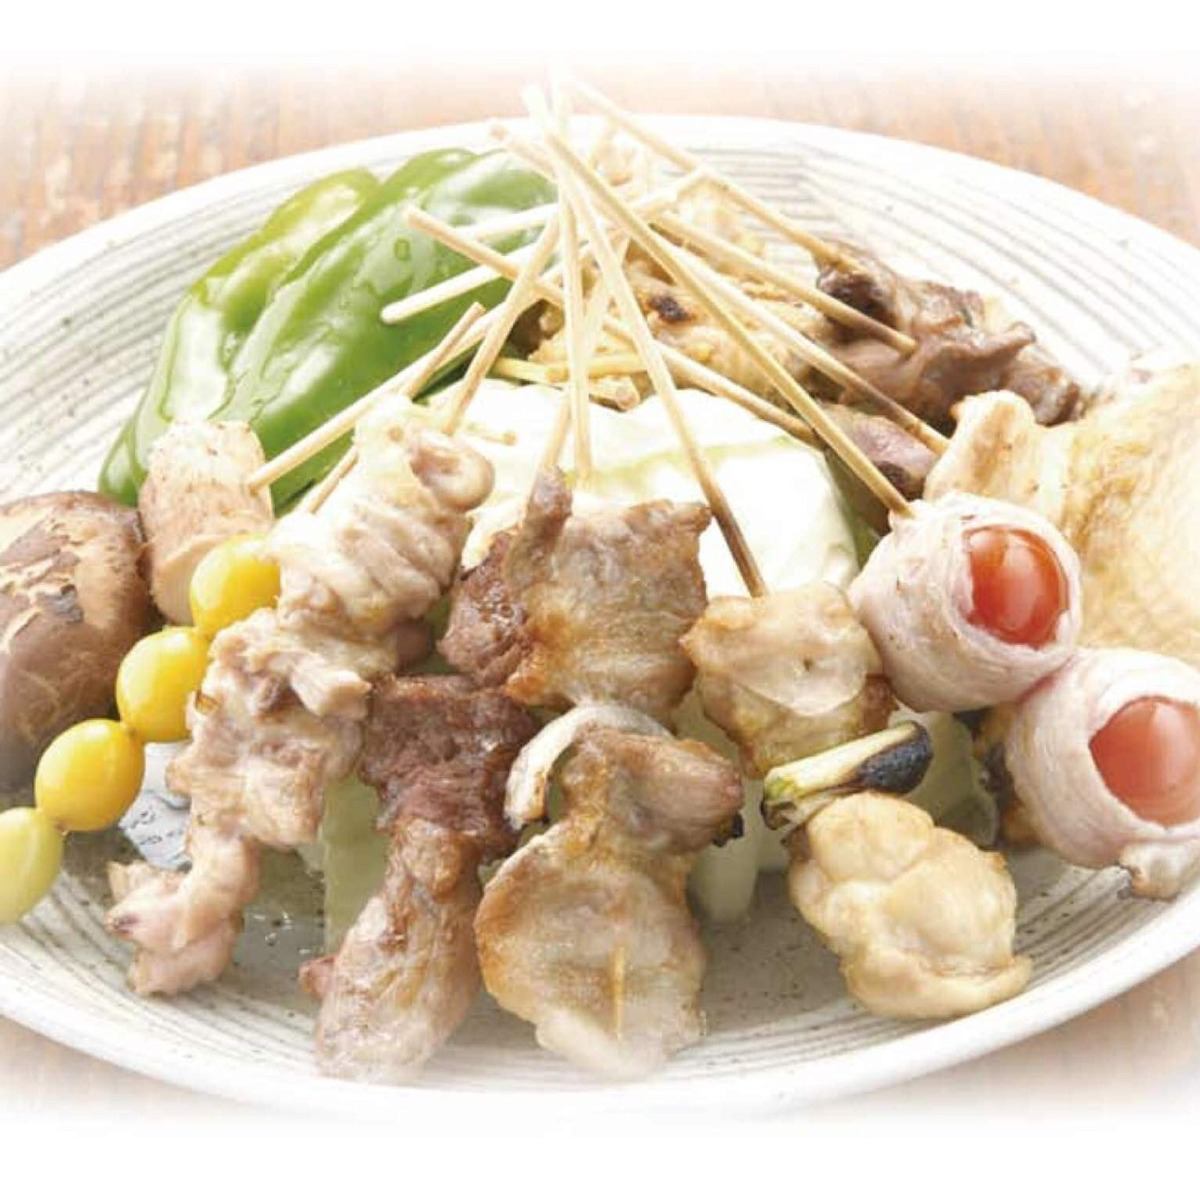 A restaurant where you can enjoy our specialty skewers and meat sashimi at a reasonable price!